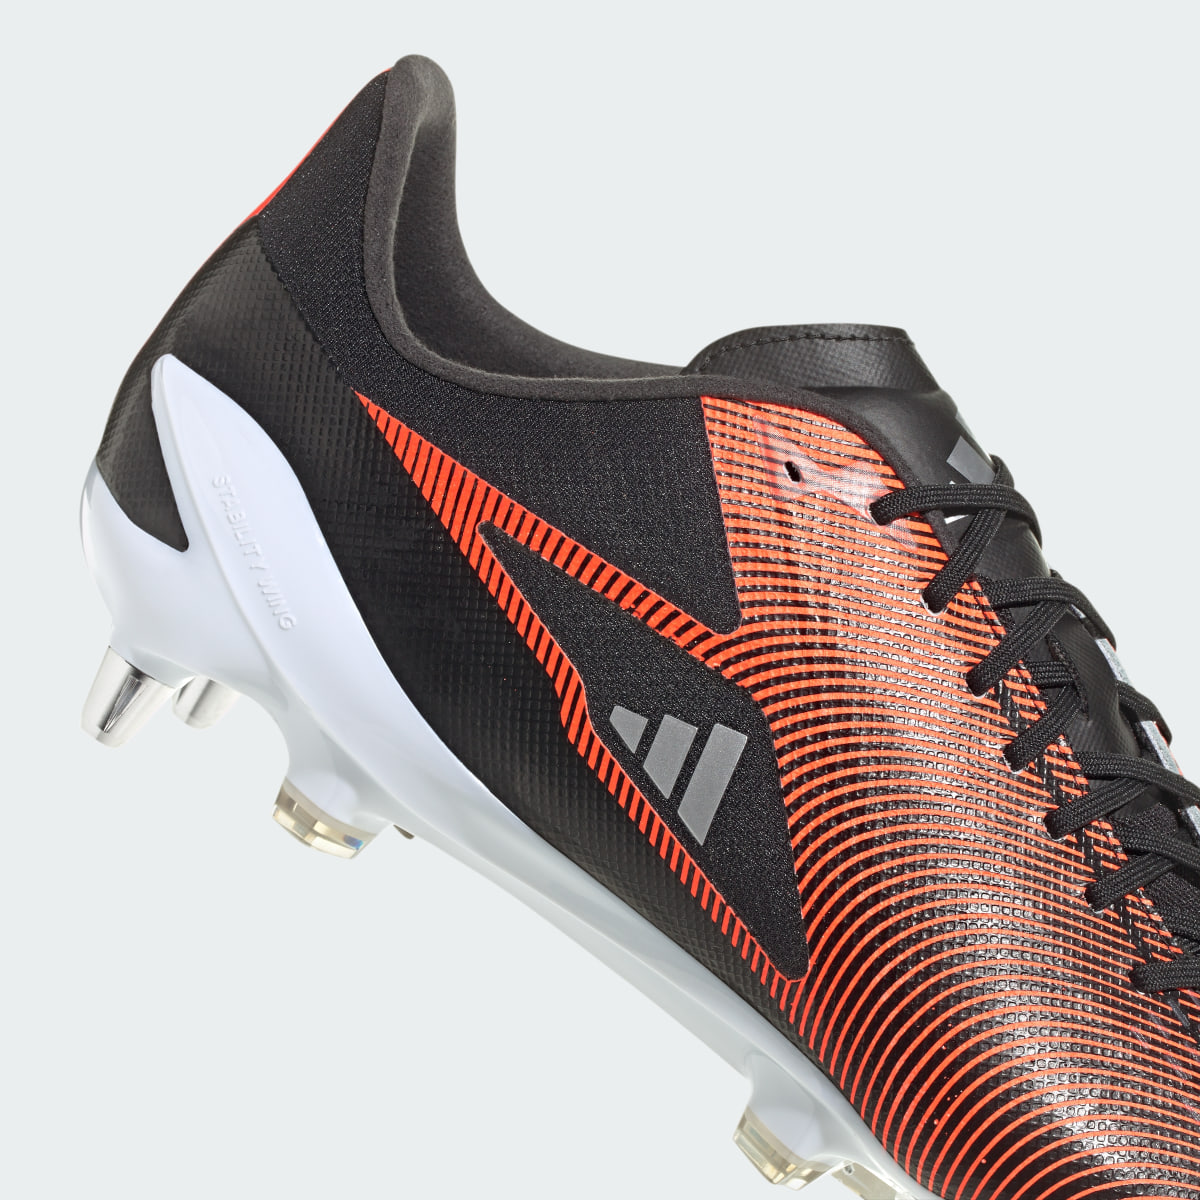 Adidas Adizero RS15 Pro Soft Ground Rugby Boots. 14